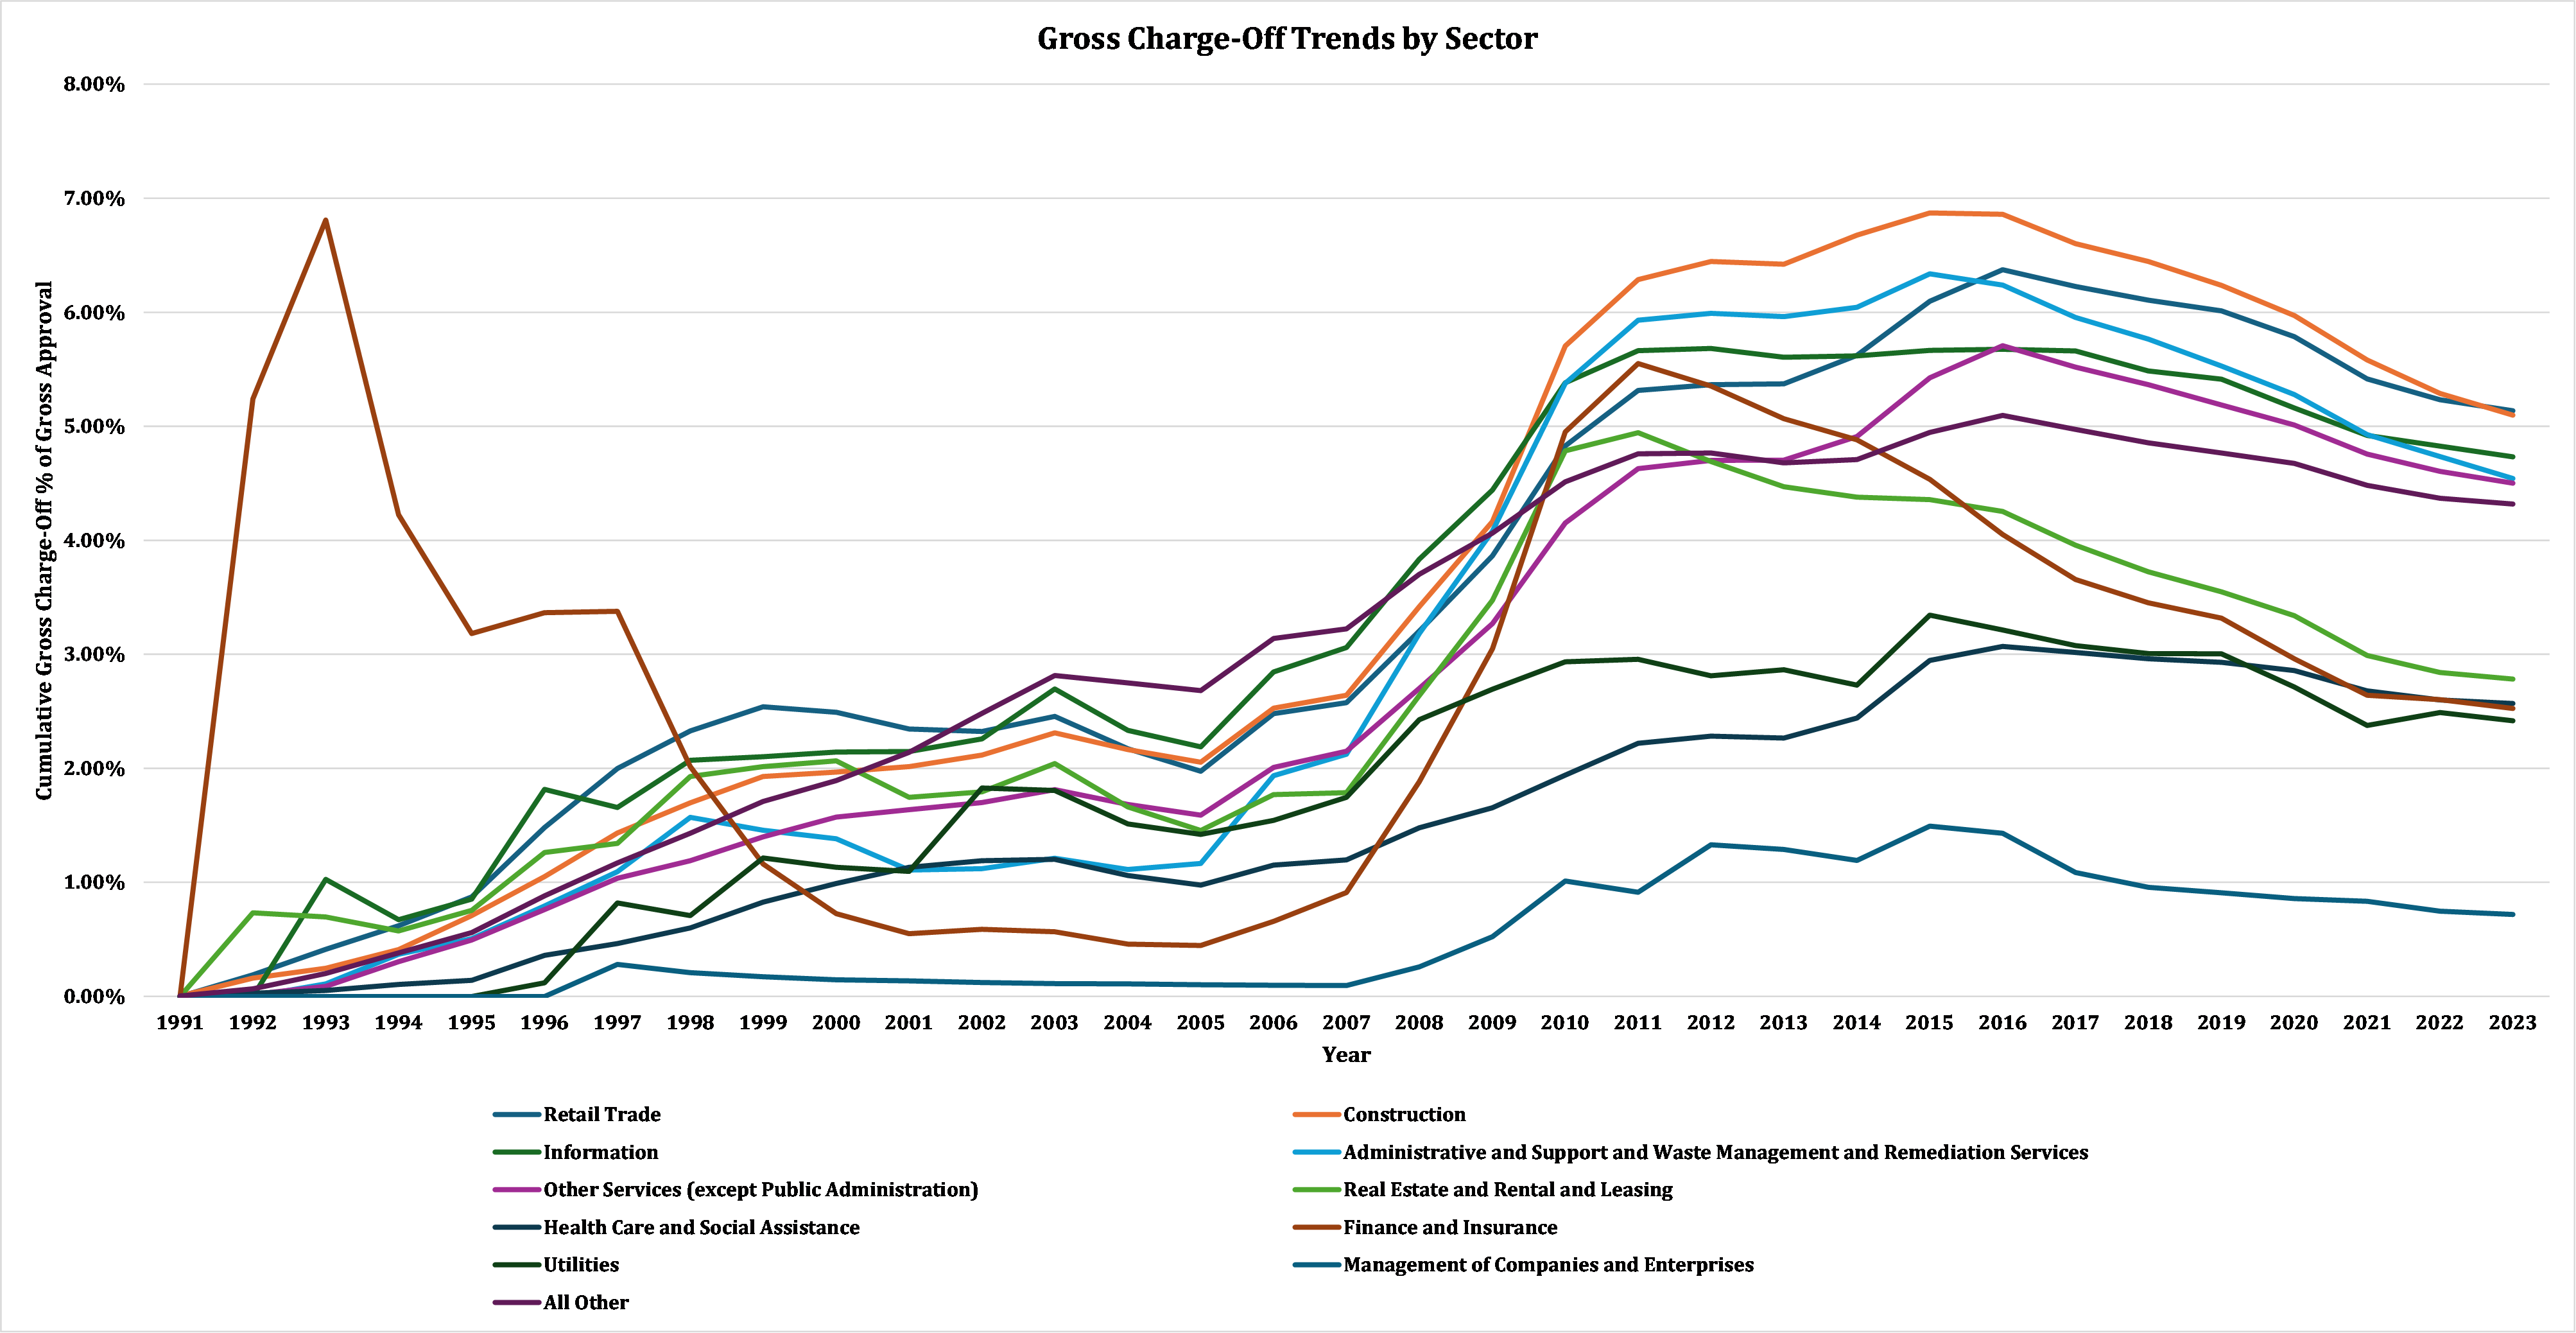 Gross charge-off trends by sector graph